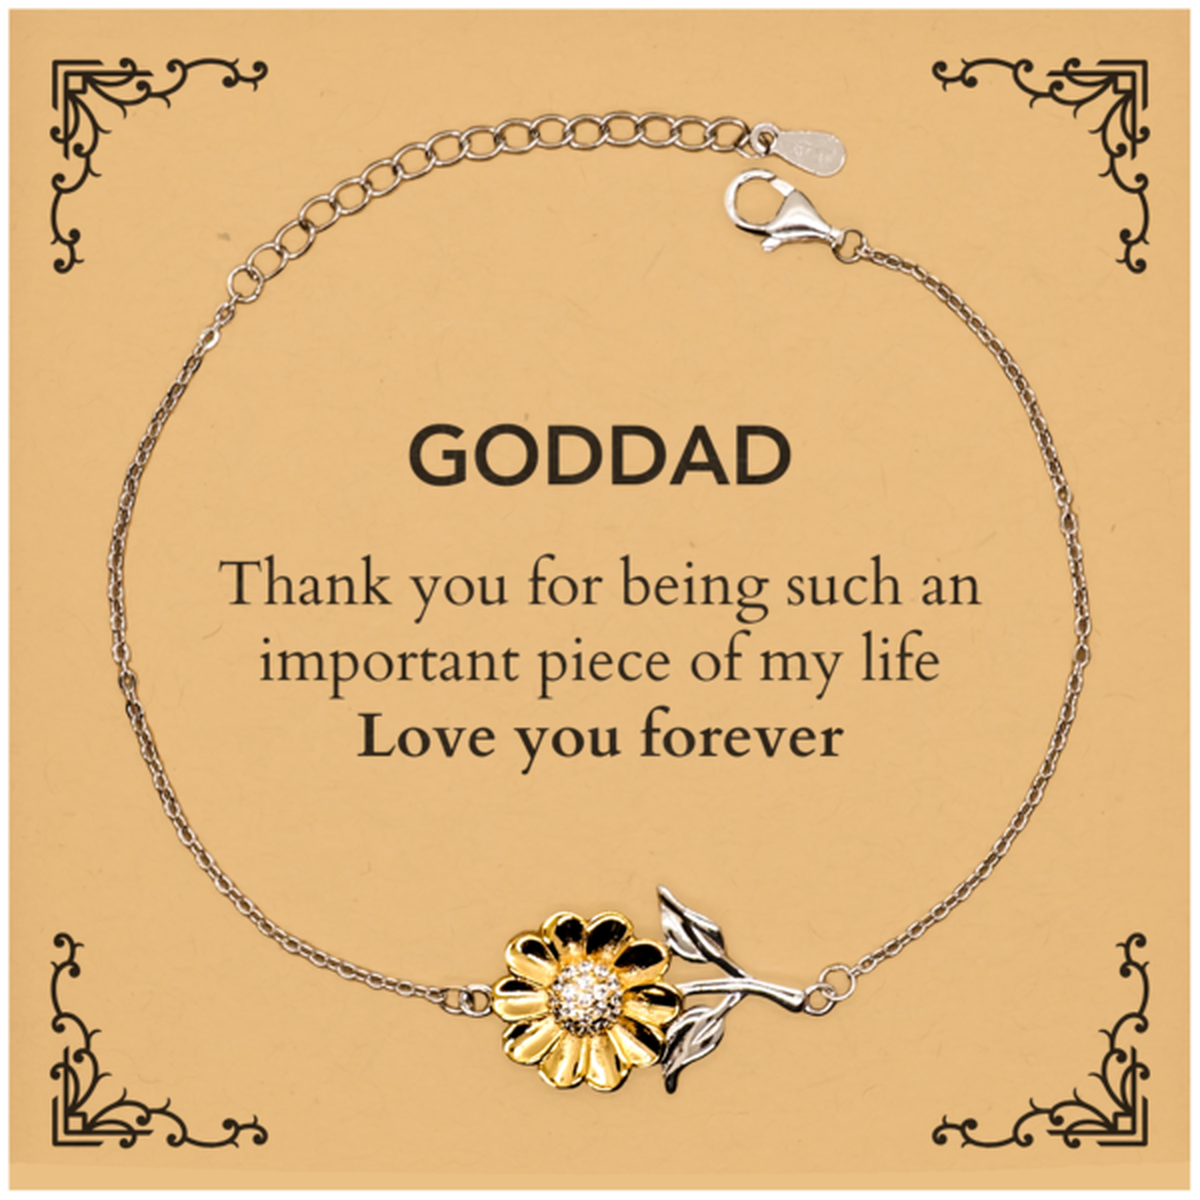 Appropriate Goddad Sunflower Bracelet Epic Birthday Gifts for Goddad Thank you for being such an important piece of my life Goddad Christmas Mothers Fathers Day